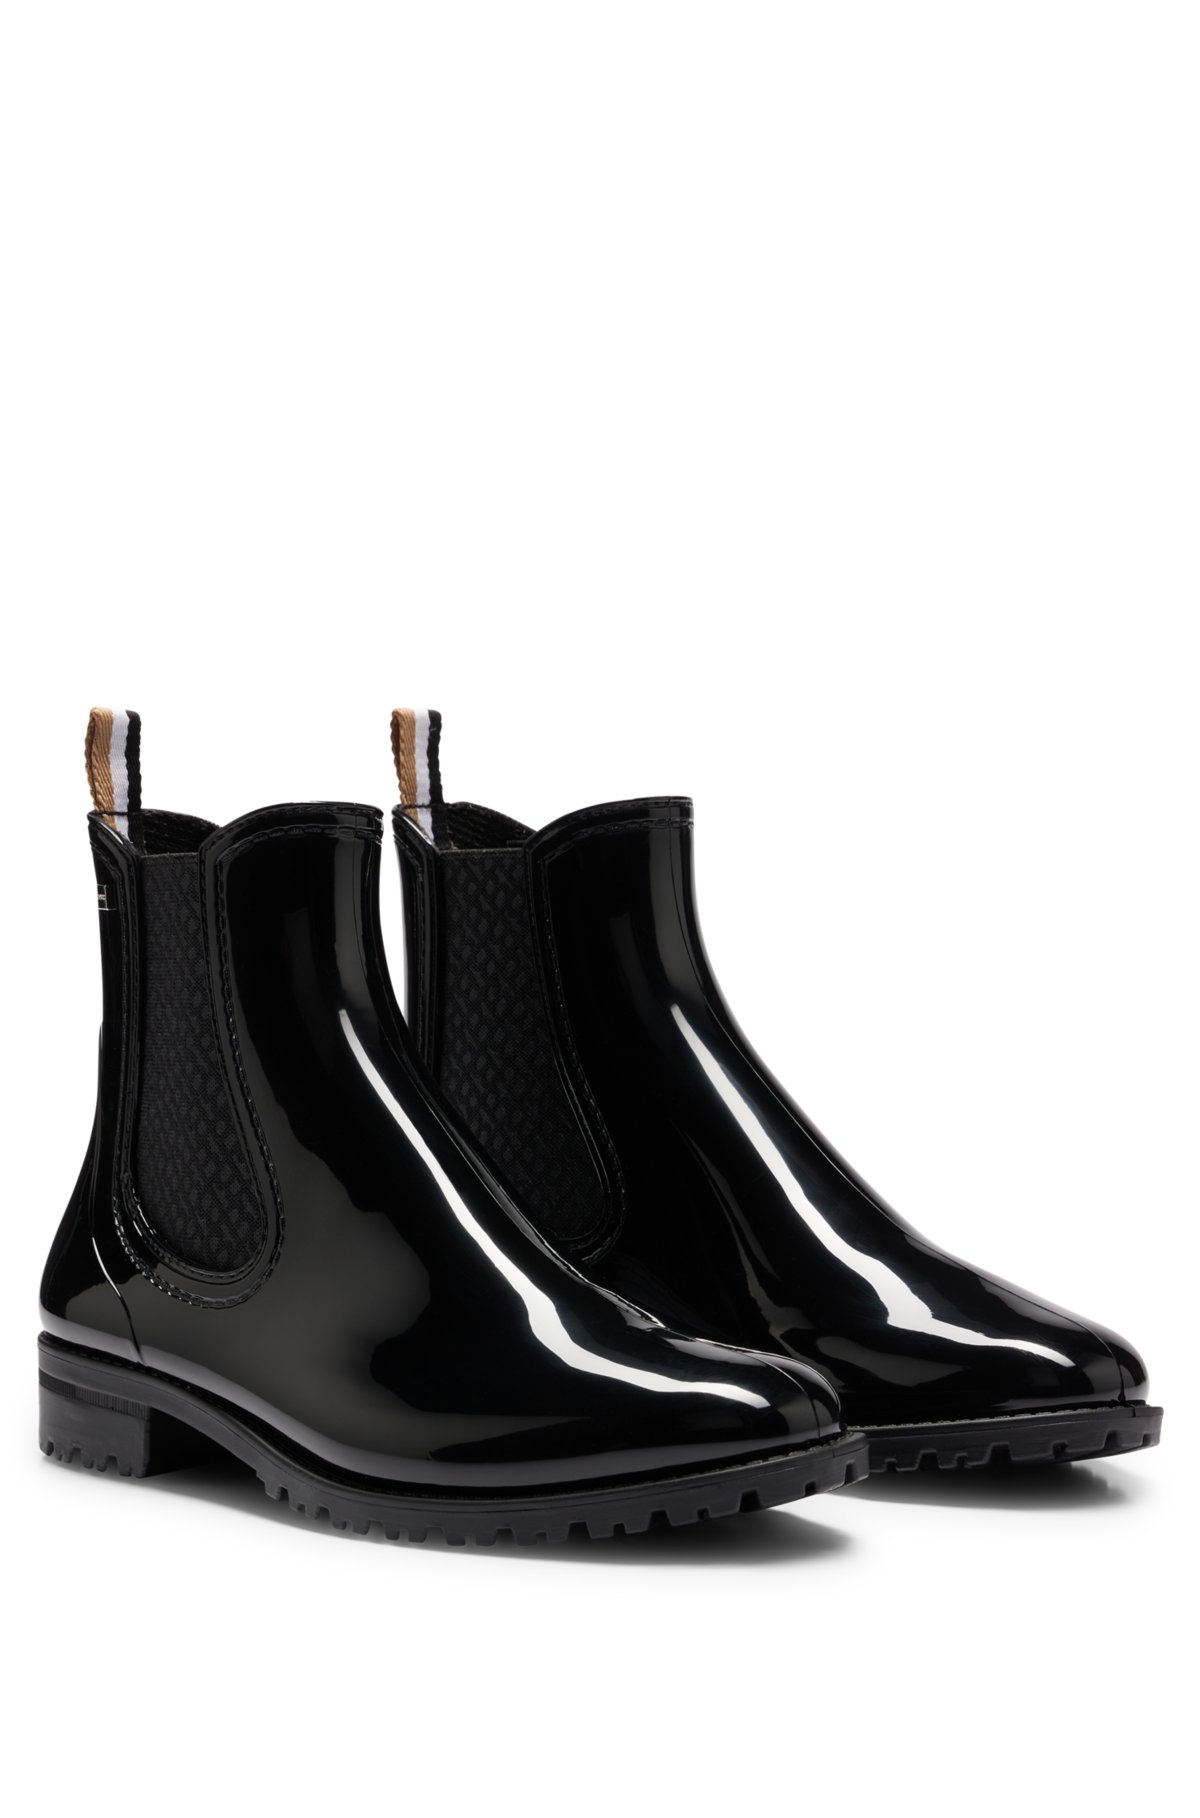 Rendezvous Rug At søge tilflugt BOSS - Glossy Chelsea-style rain boots with branded trim